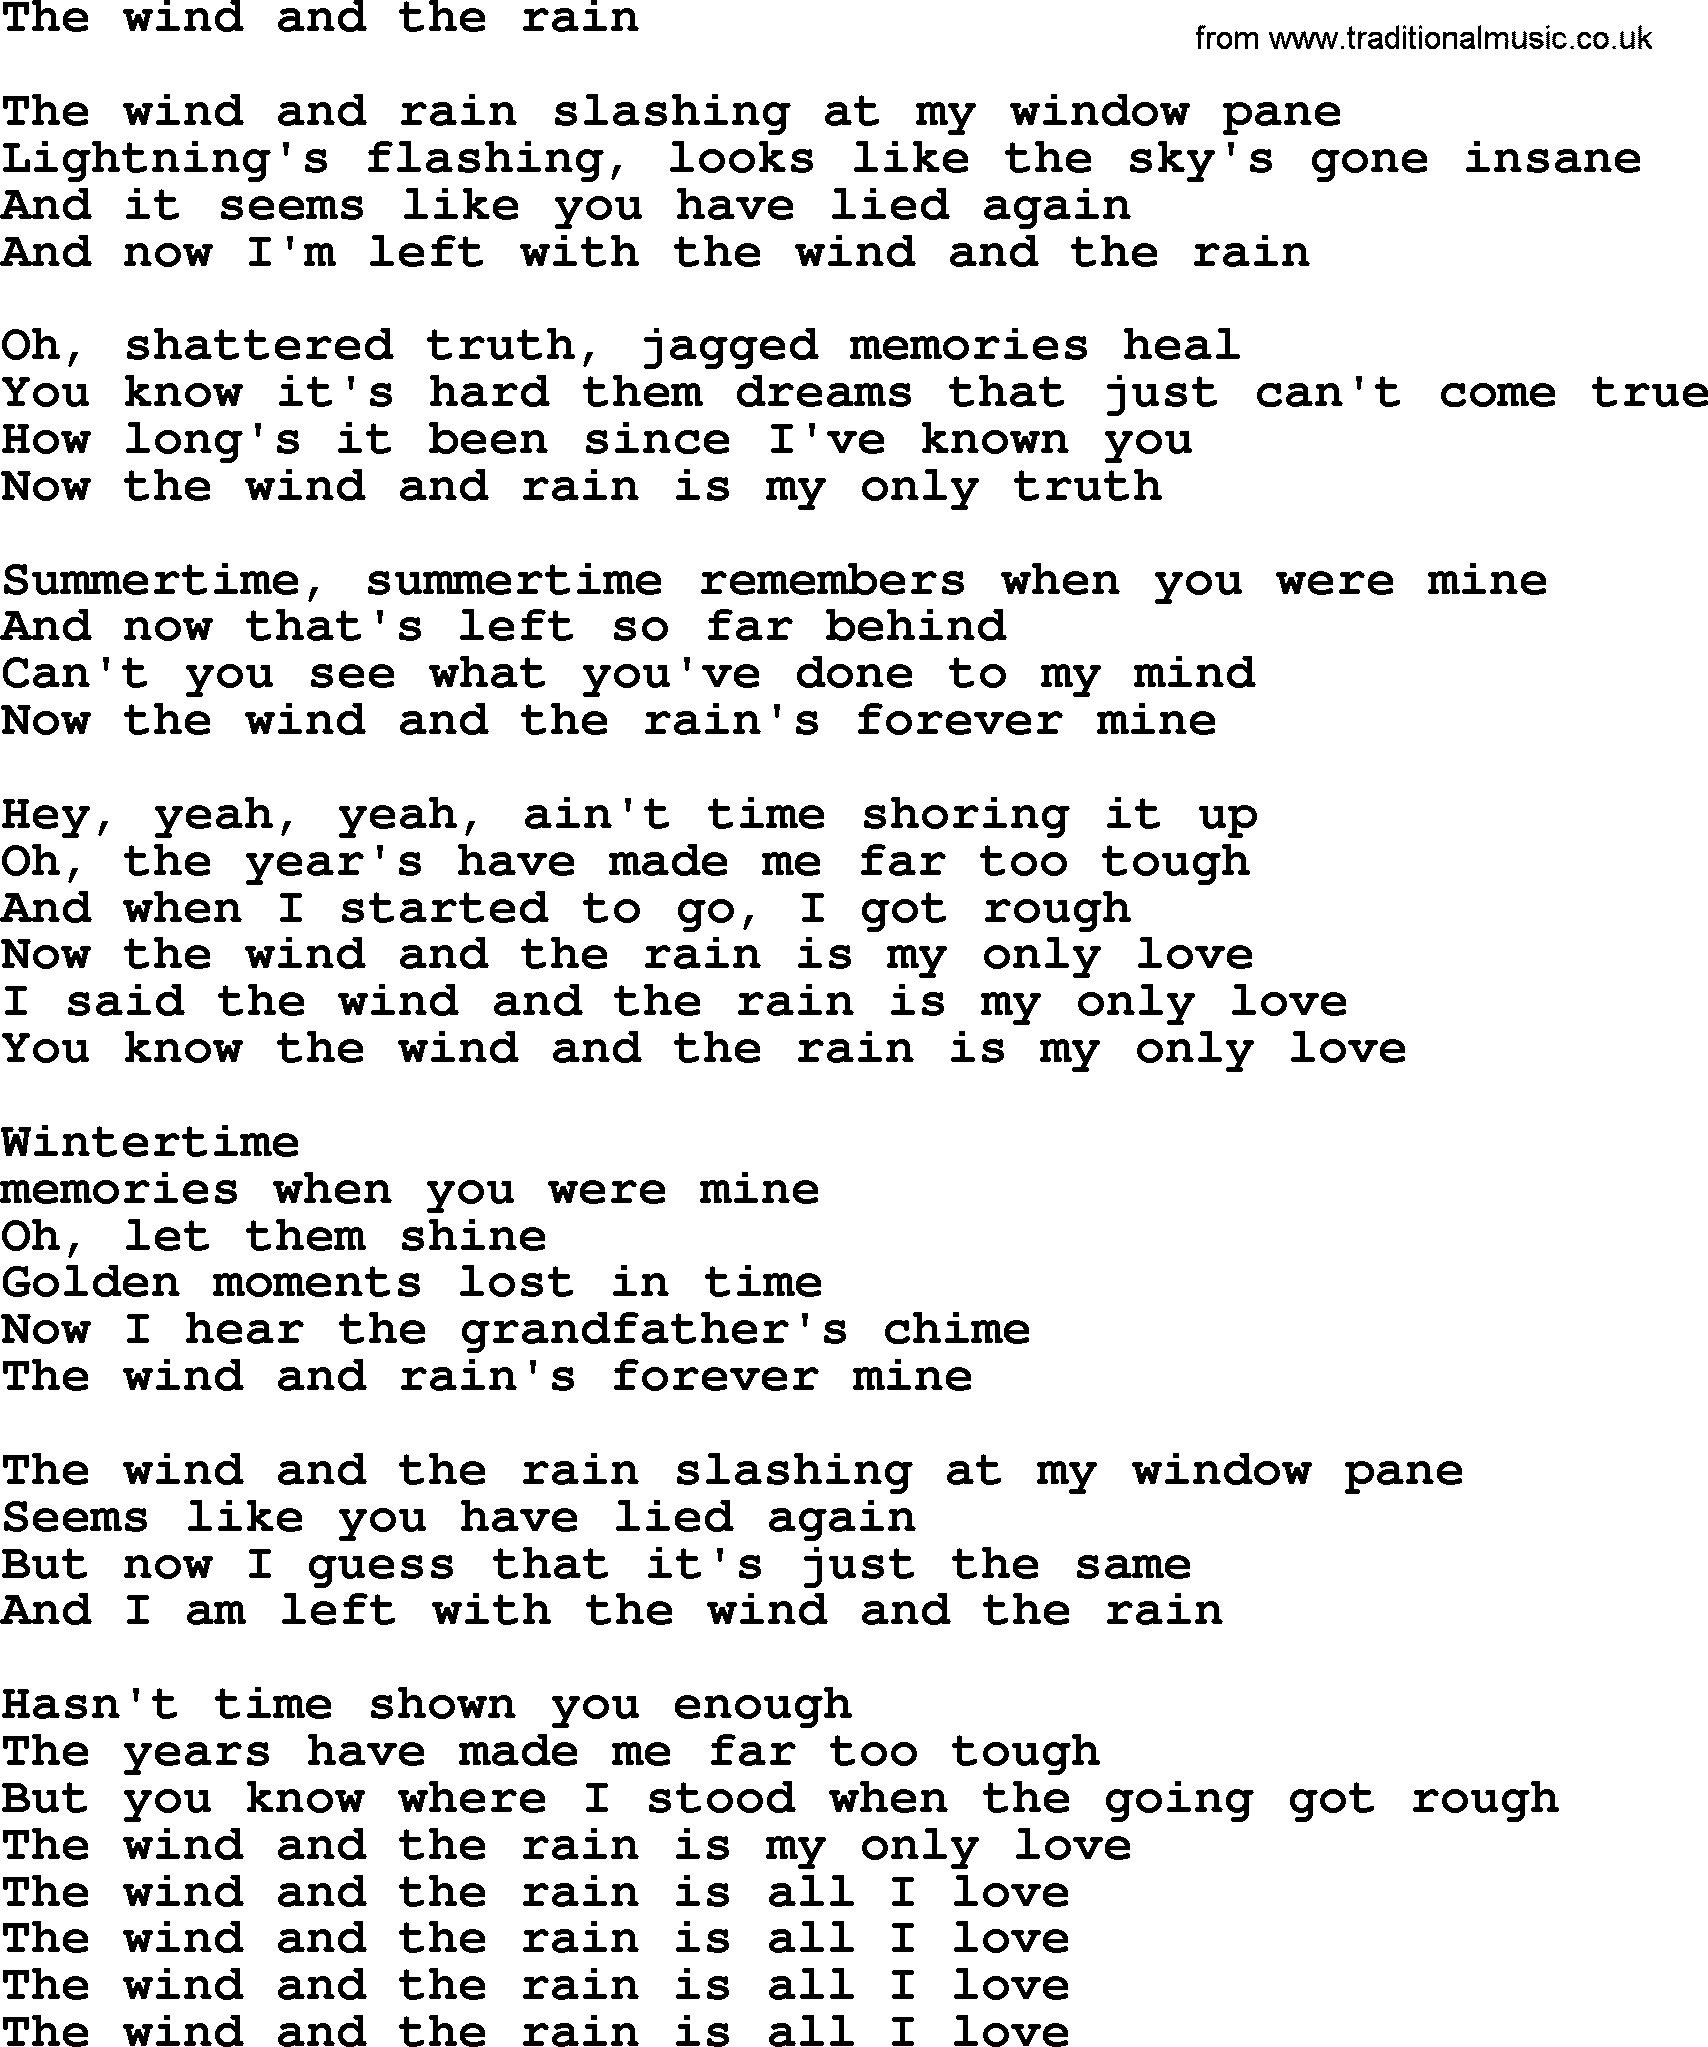 Bruce Springsteen song: The Wind And The Rain lyrics